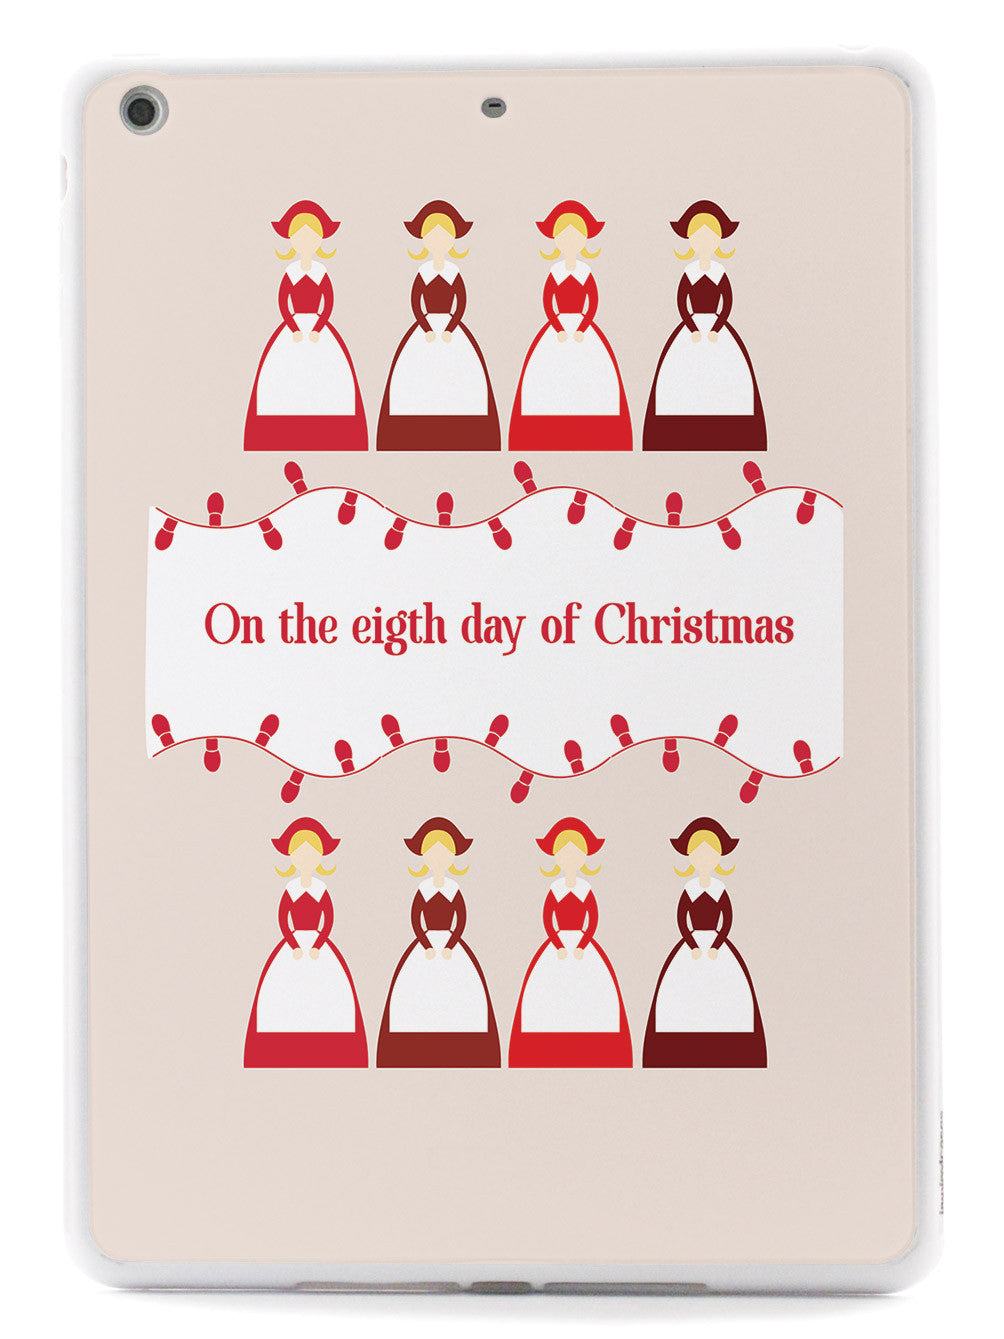 On the Eighth Day of Christmas - 8 Maids a Milking  Case